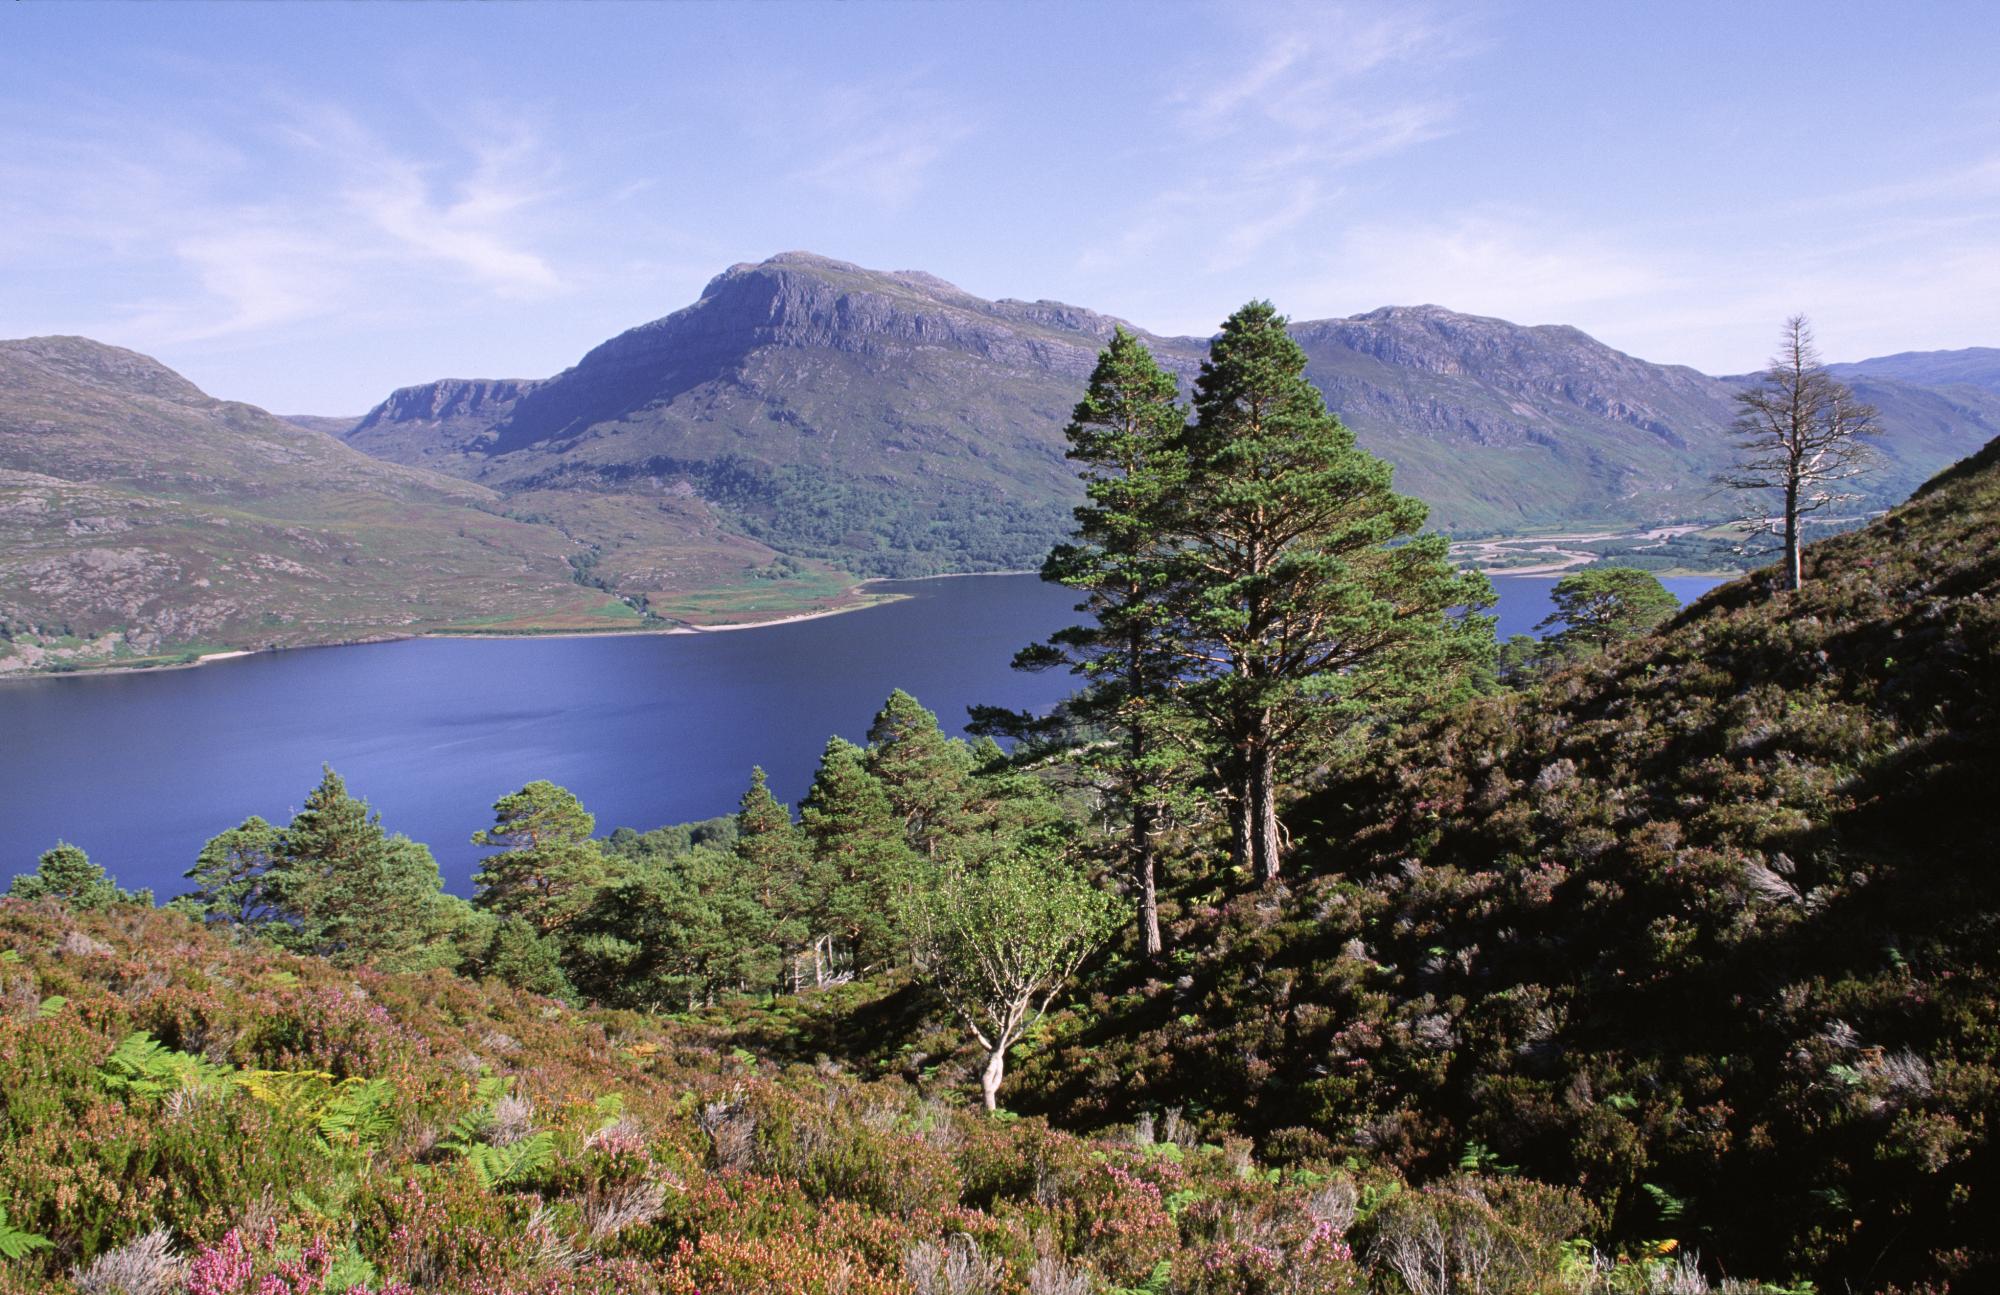 View over Scots pines and Loch Maree from the mountain trail, Beinn Eighe NNR, West Highland Area. ©Lorne Gill/SNH. For information on reproduction rights contact the Scottish Natural Heritage Image Library on Tel. 01738 444177 or www.nature.scot